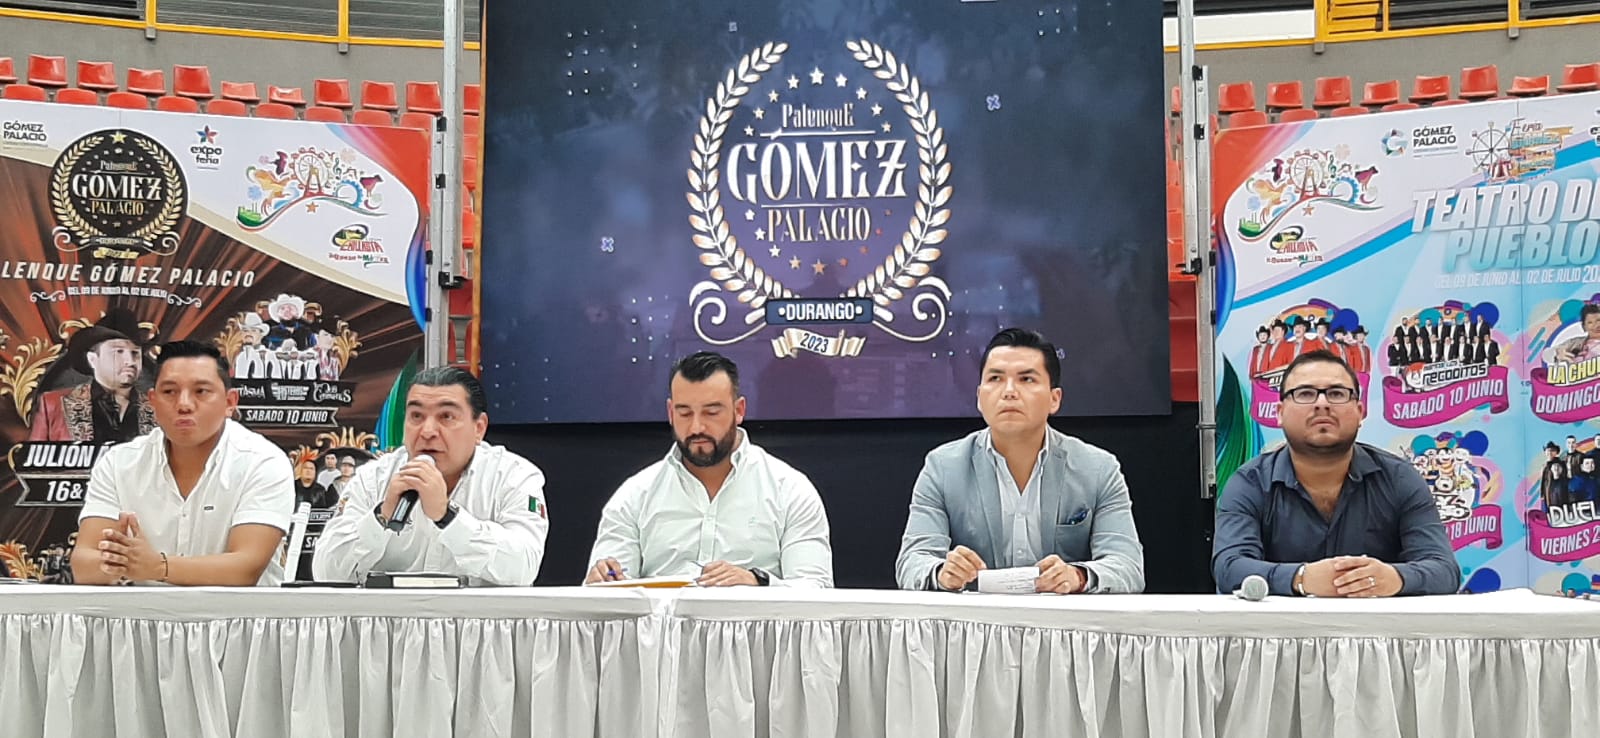 Here we present the billboard of artists who come to the Gómez Palacio Expoferia 2023 ‘A Fair with a Star’